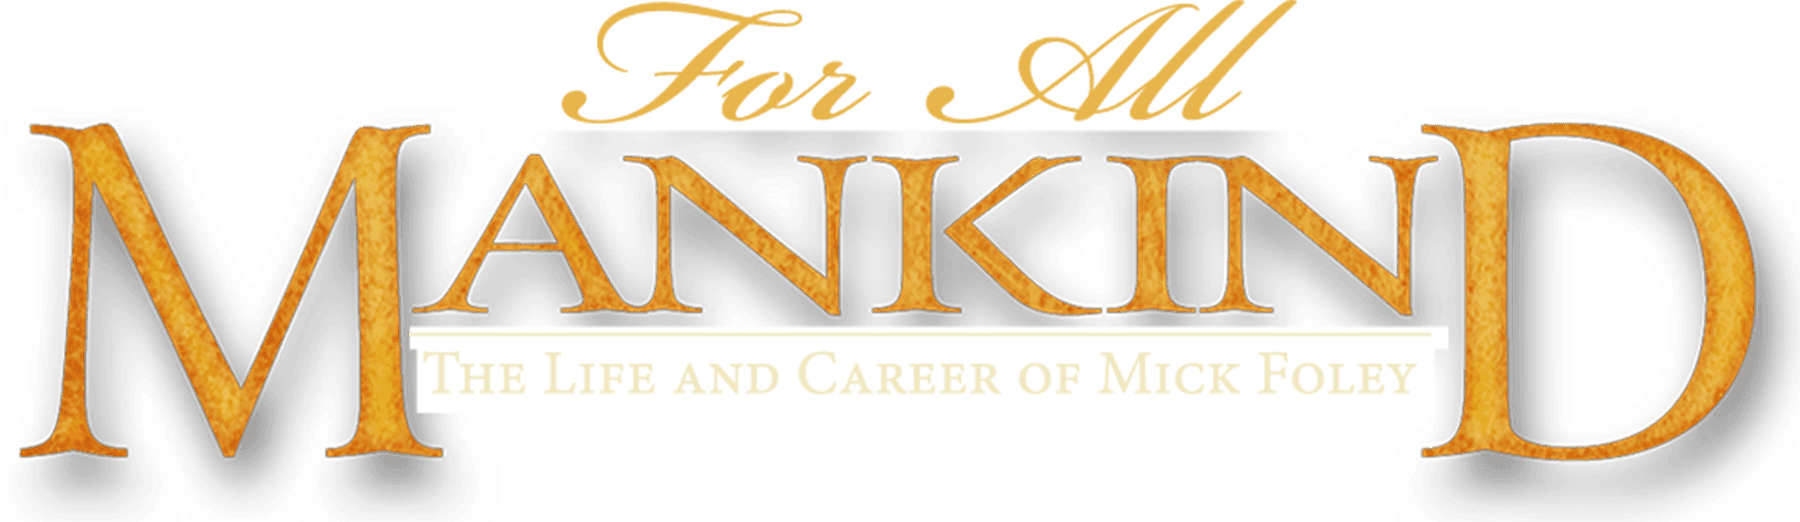 For All Mankind - The Life and Career of Mick Foley logo